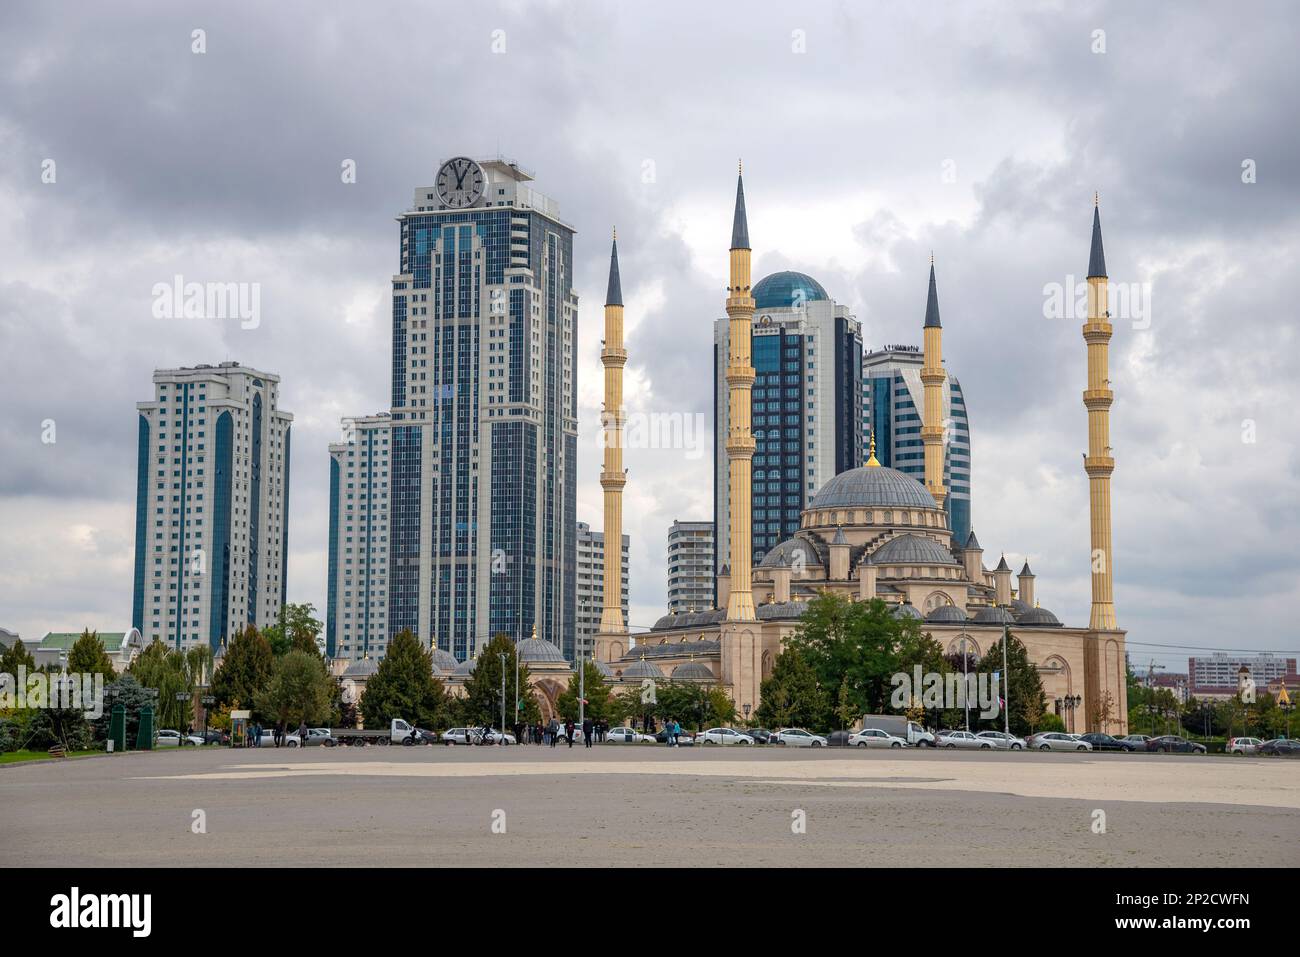 GROZNY, RUSSIA - SEPTEMBER 29, 2021: The Heart of Chechnya Mosque in the urban landscape. Grozny, Chechen Republic. Russia Stock Photo